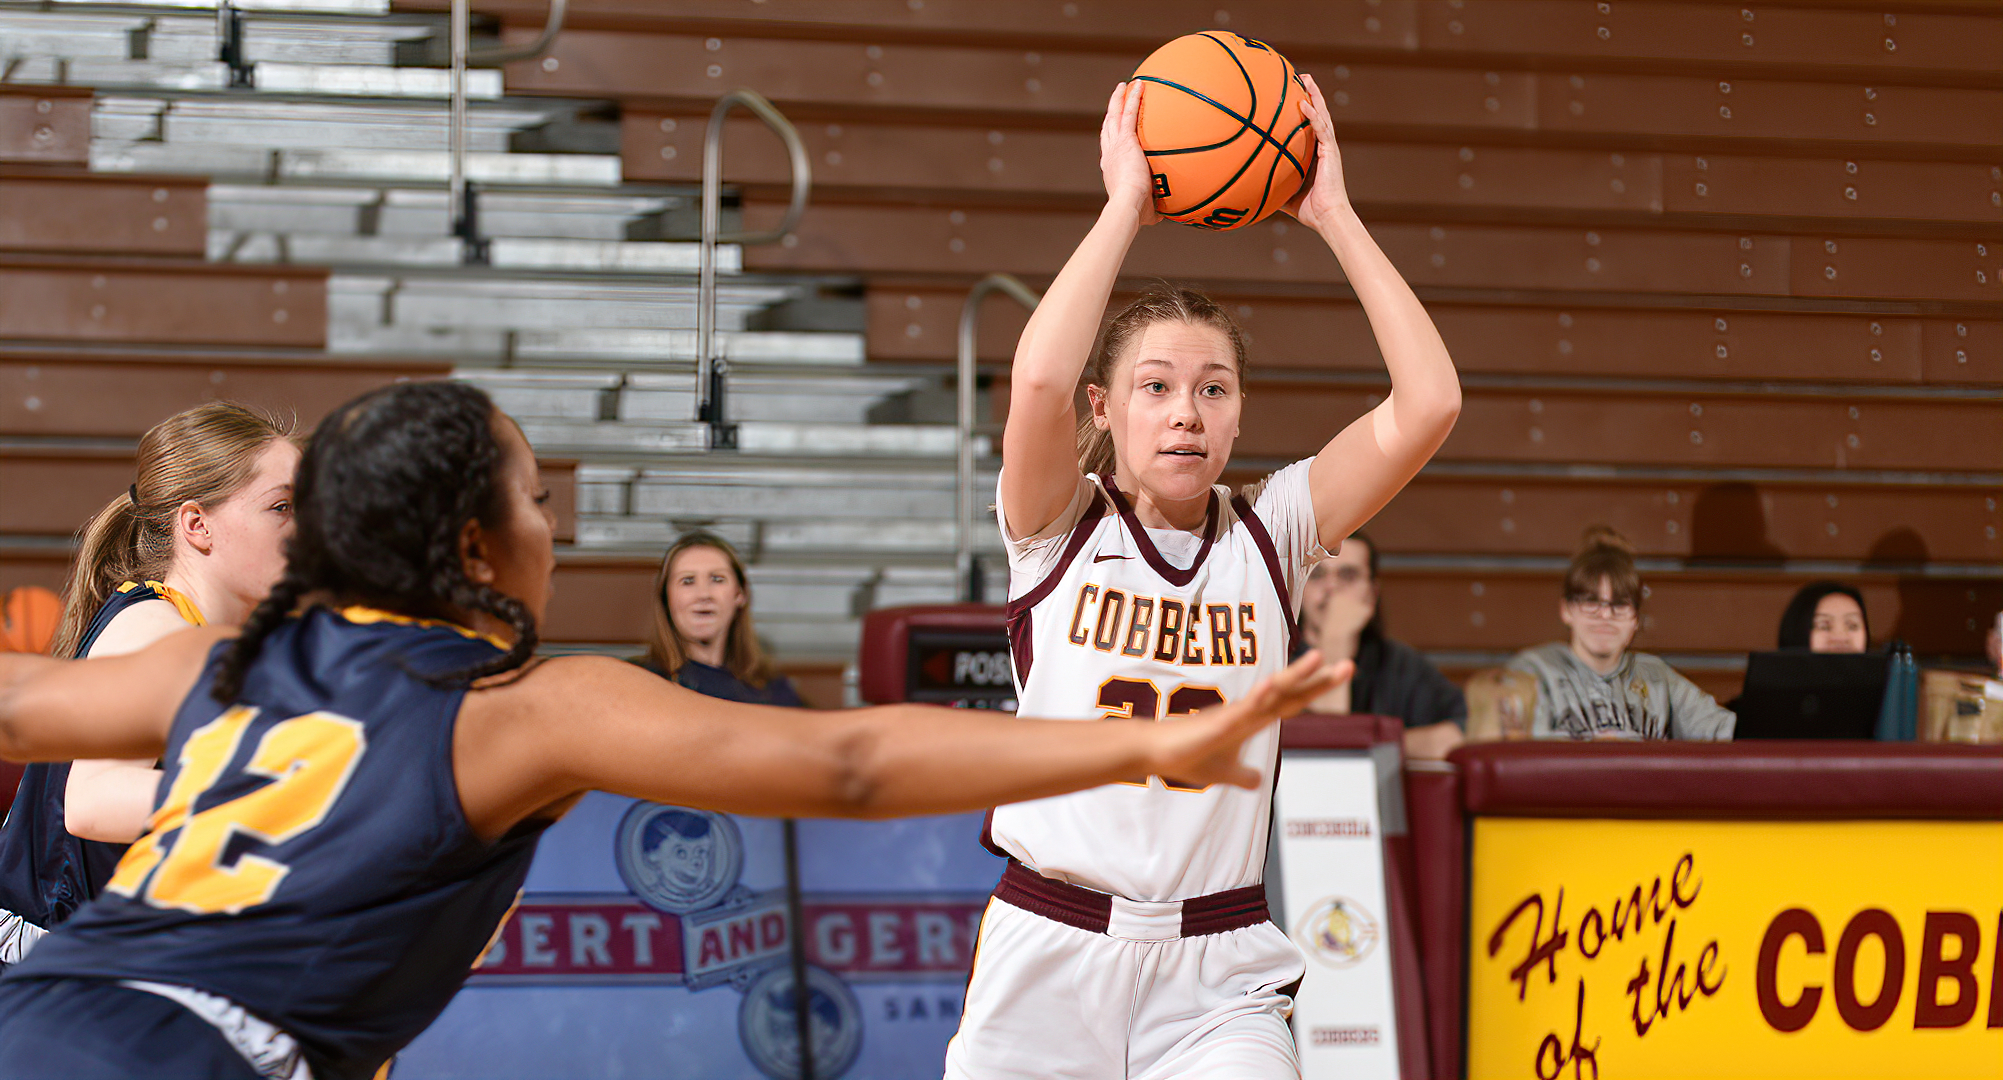 Sophomore Symone Beld scored a career-18 points, and had a team-high five boards in the Cobbers' 79-49 win over Carleton.